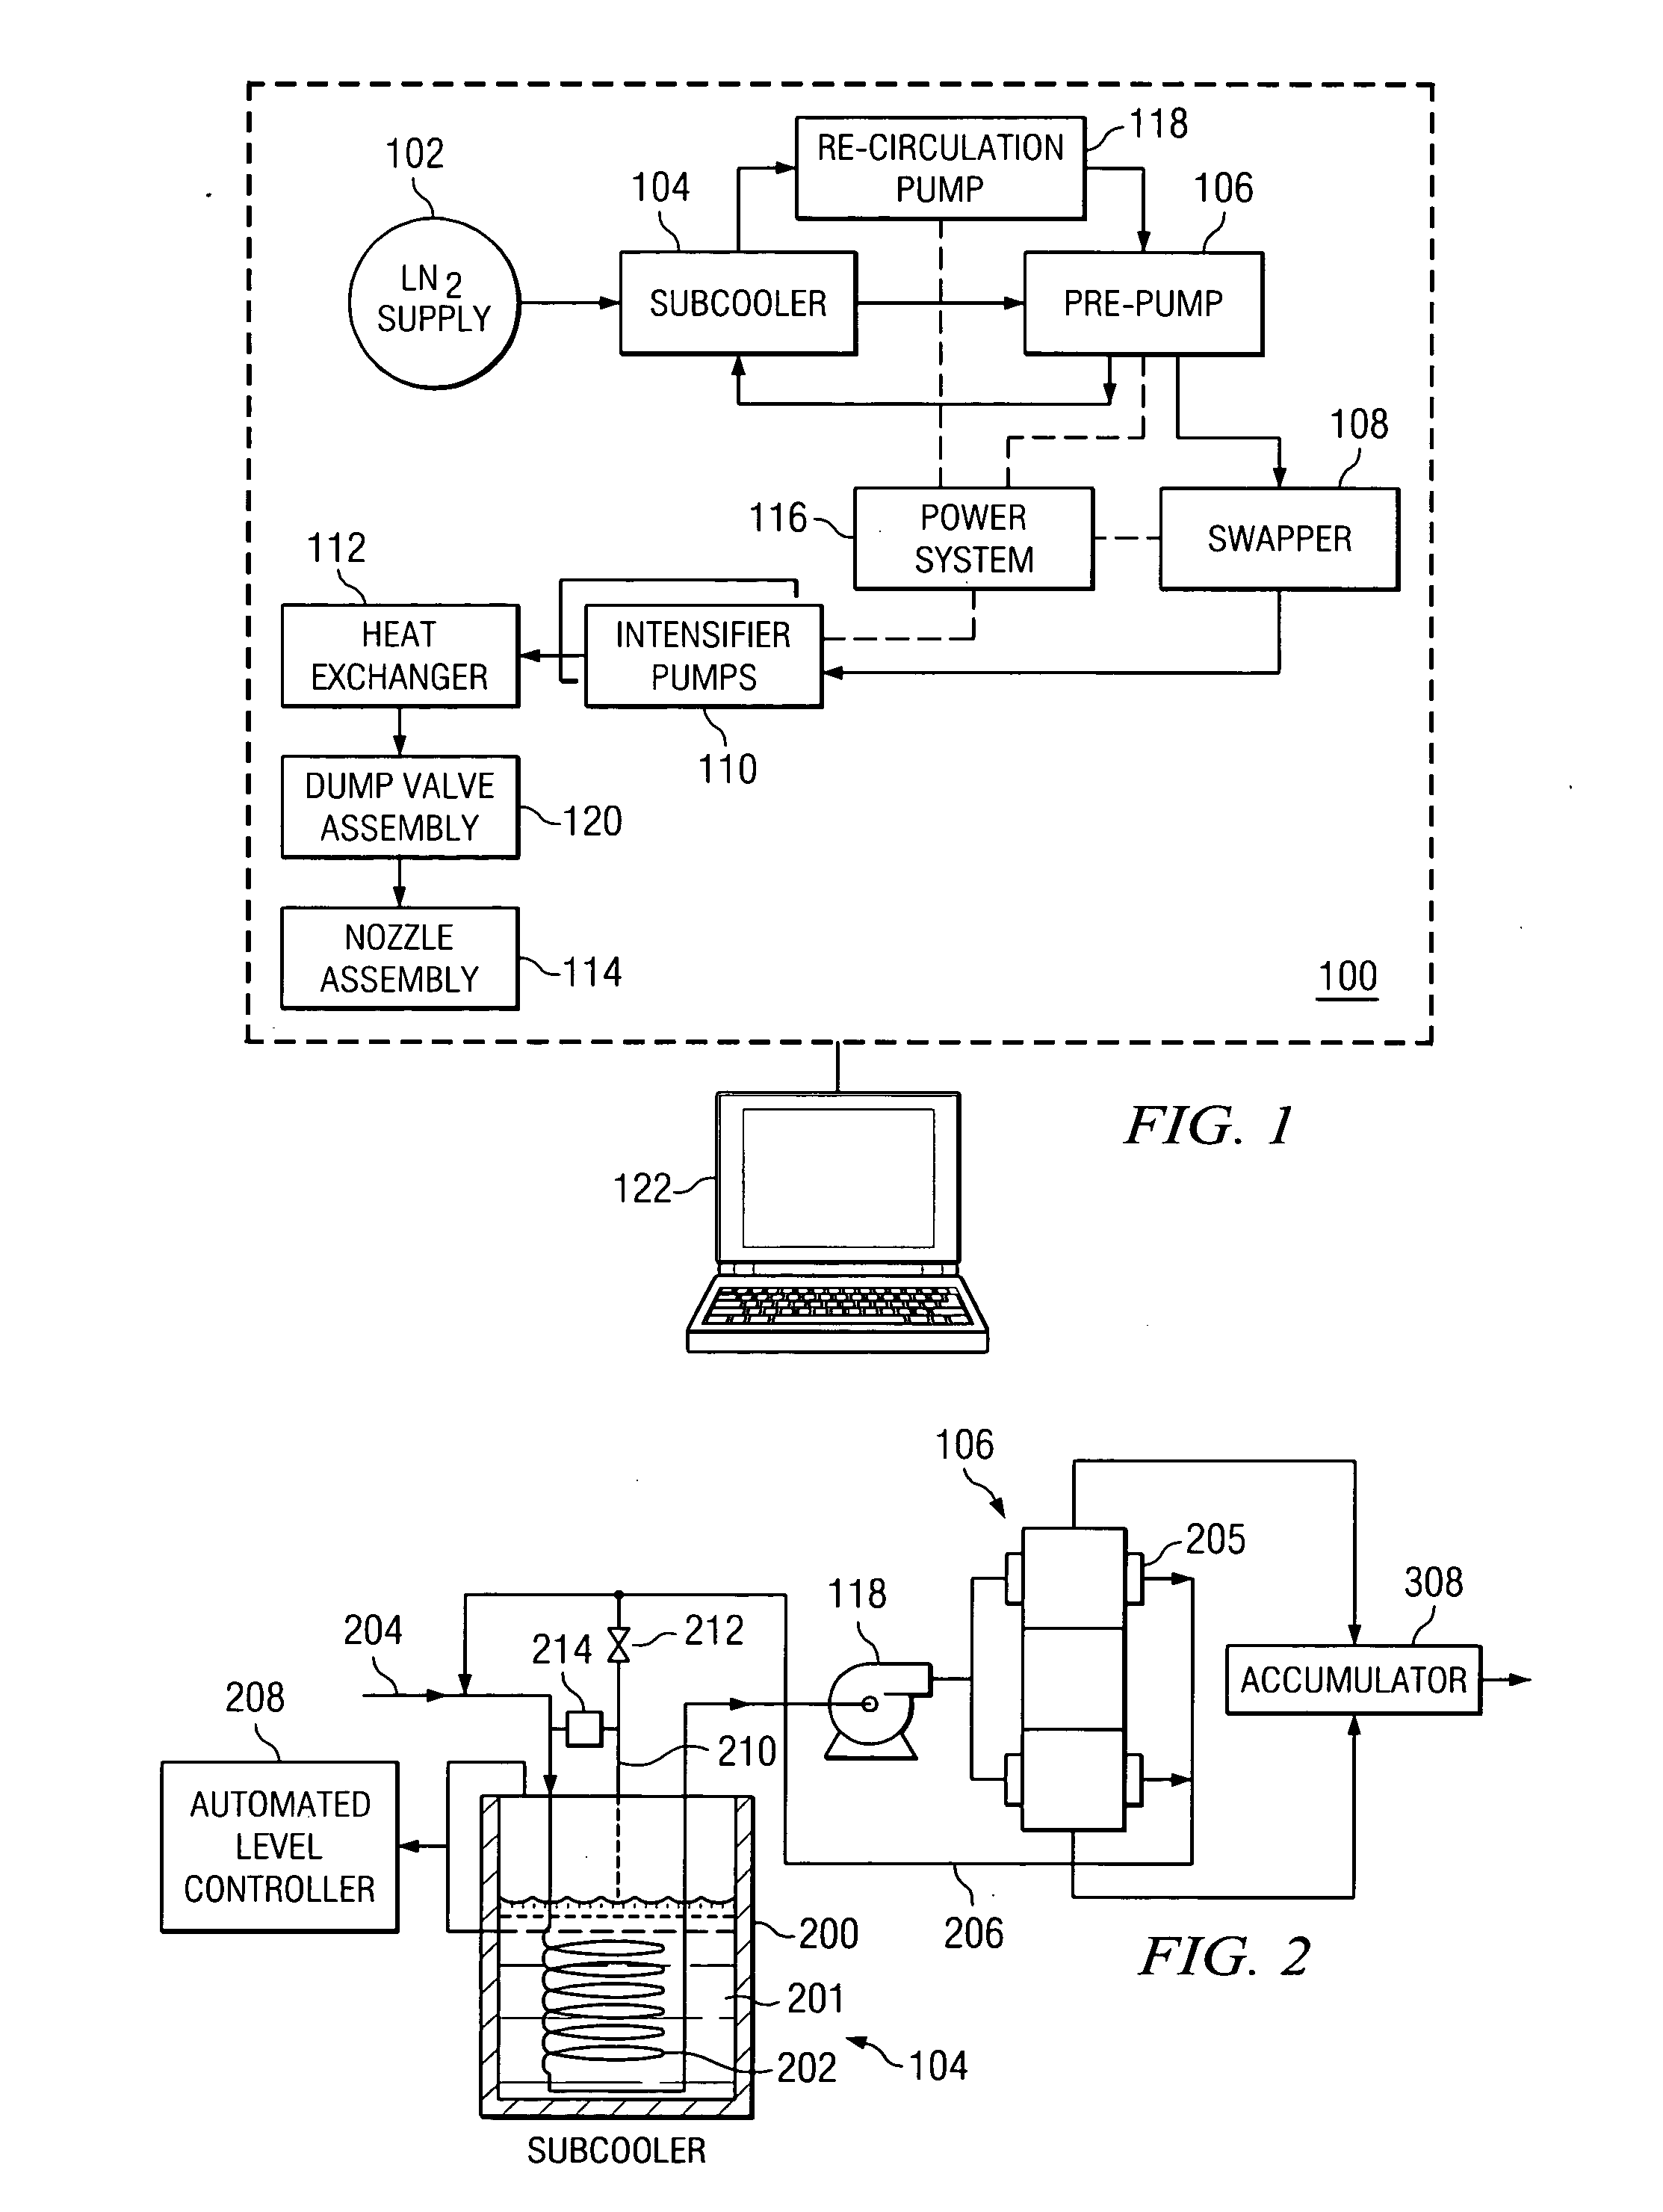 System and method for delivering cryogenic fluid